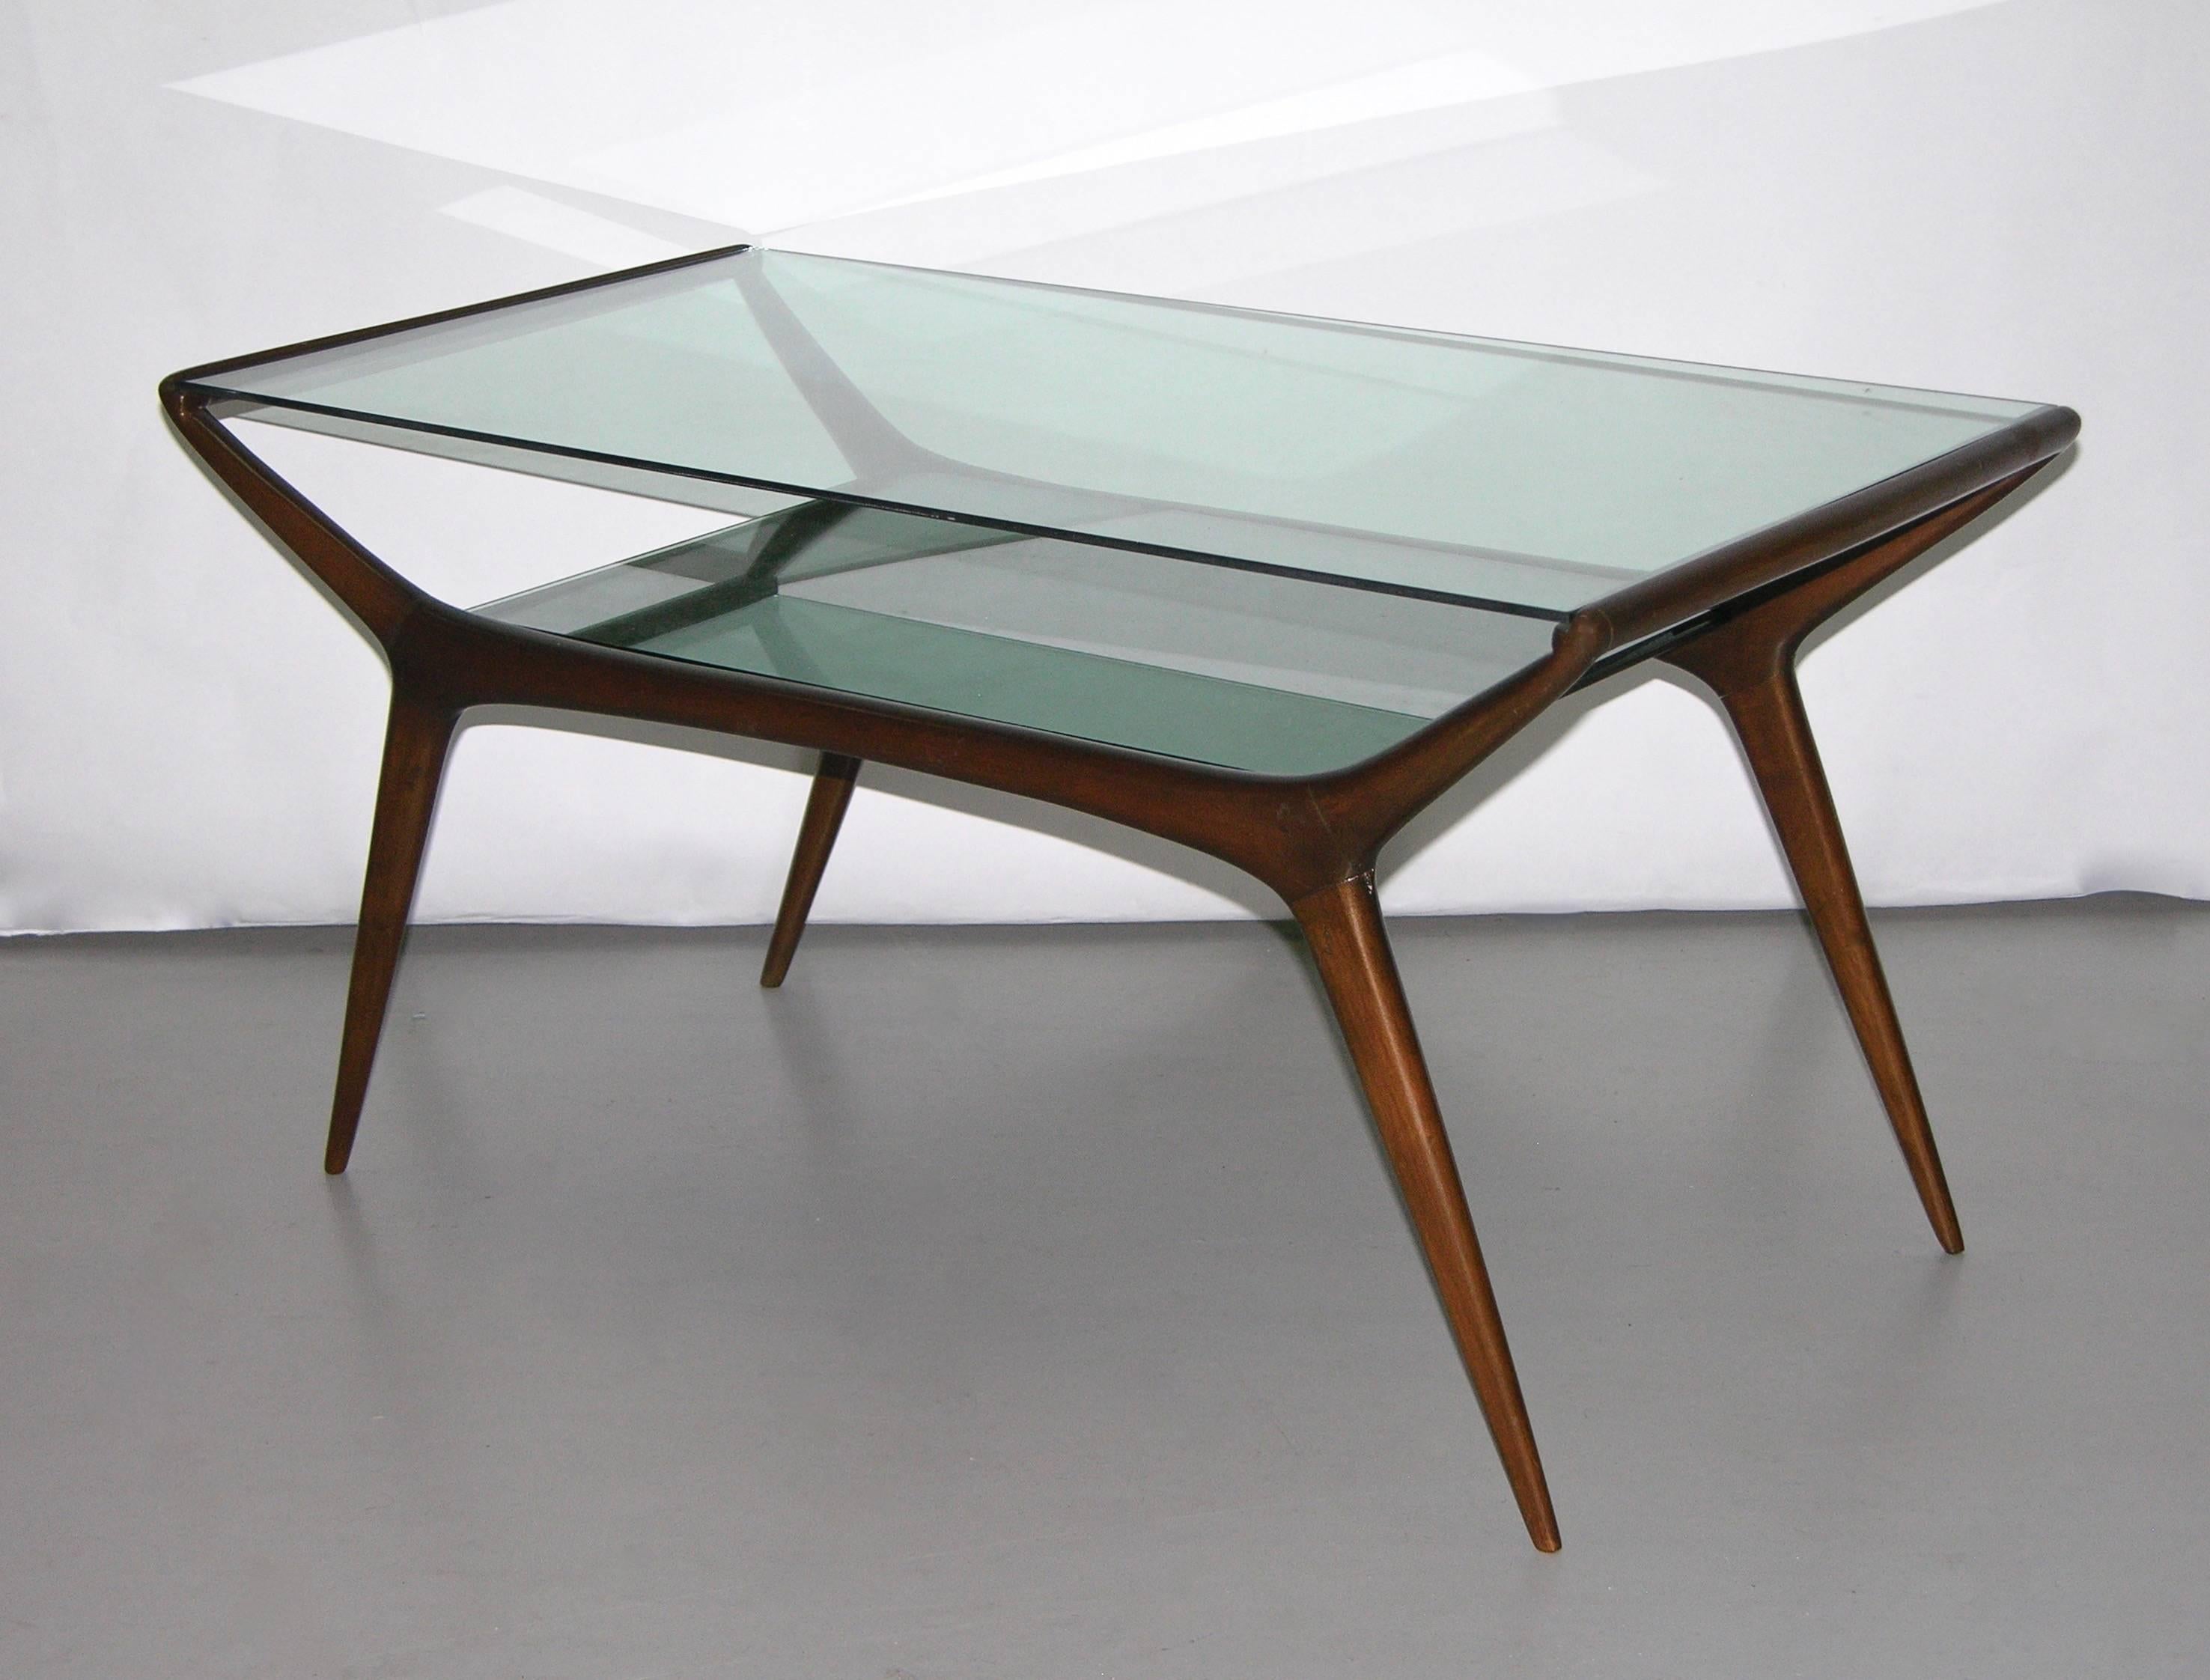 Mid-20th Century Ico Parisi 1950s Italian Modern Two-Tier Mahogany and Glass Sofa or Coffee Table